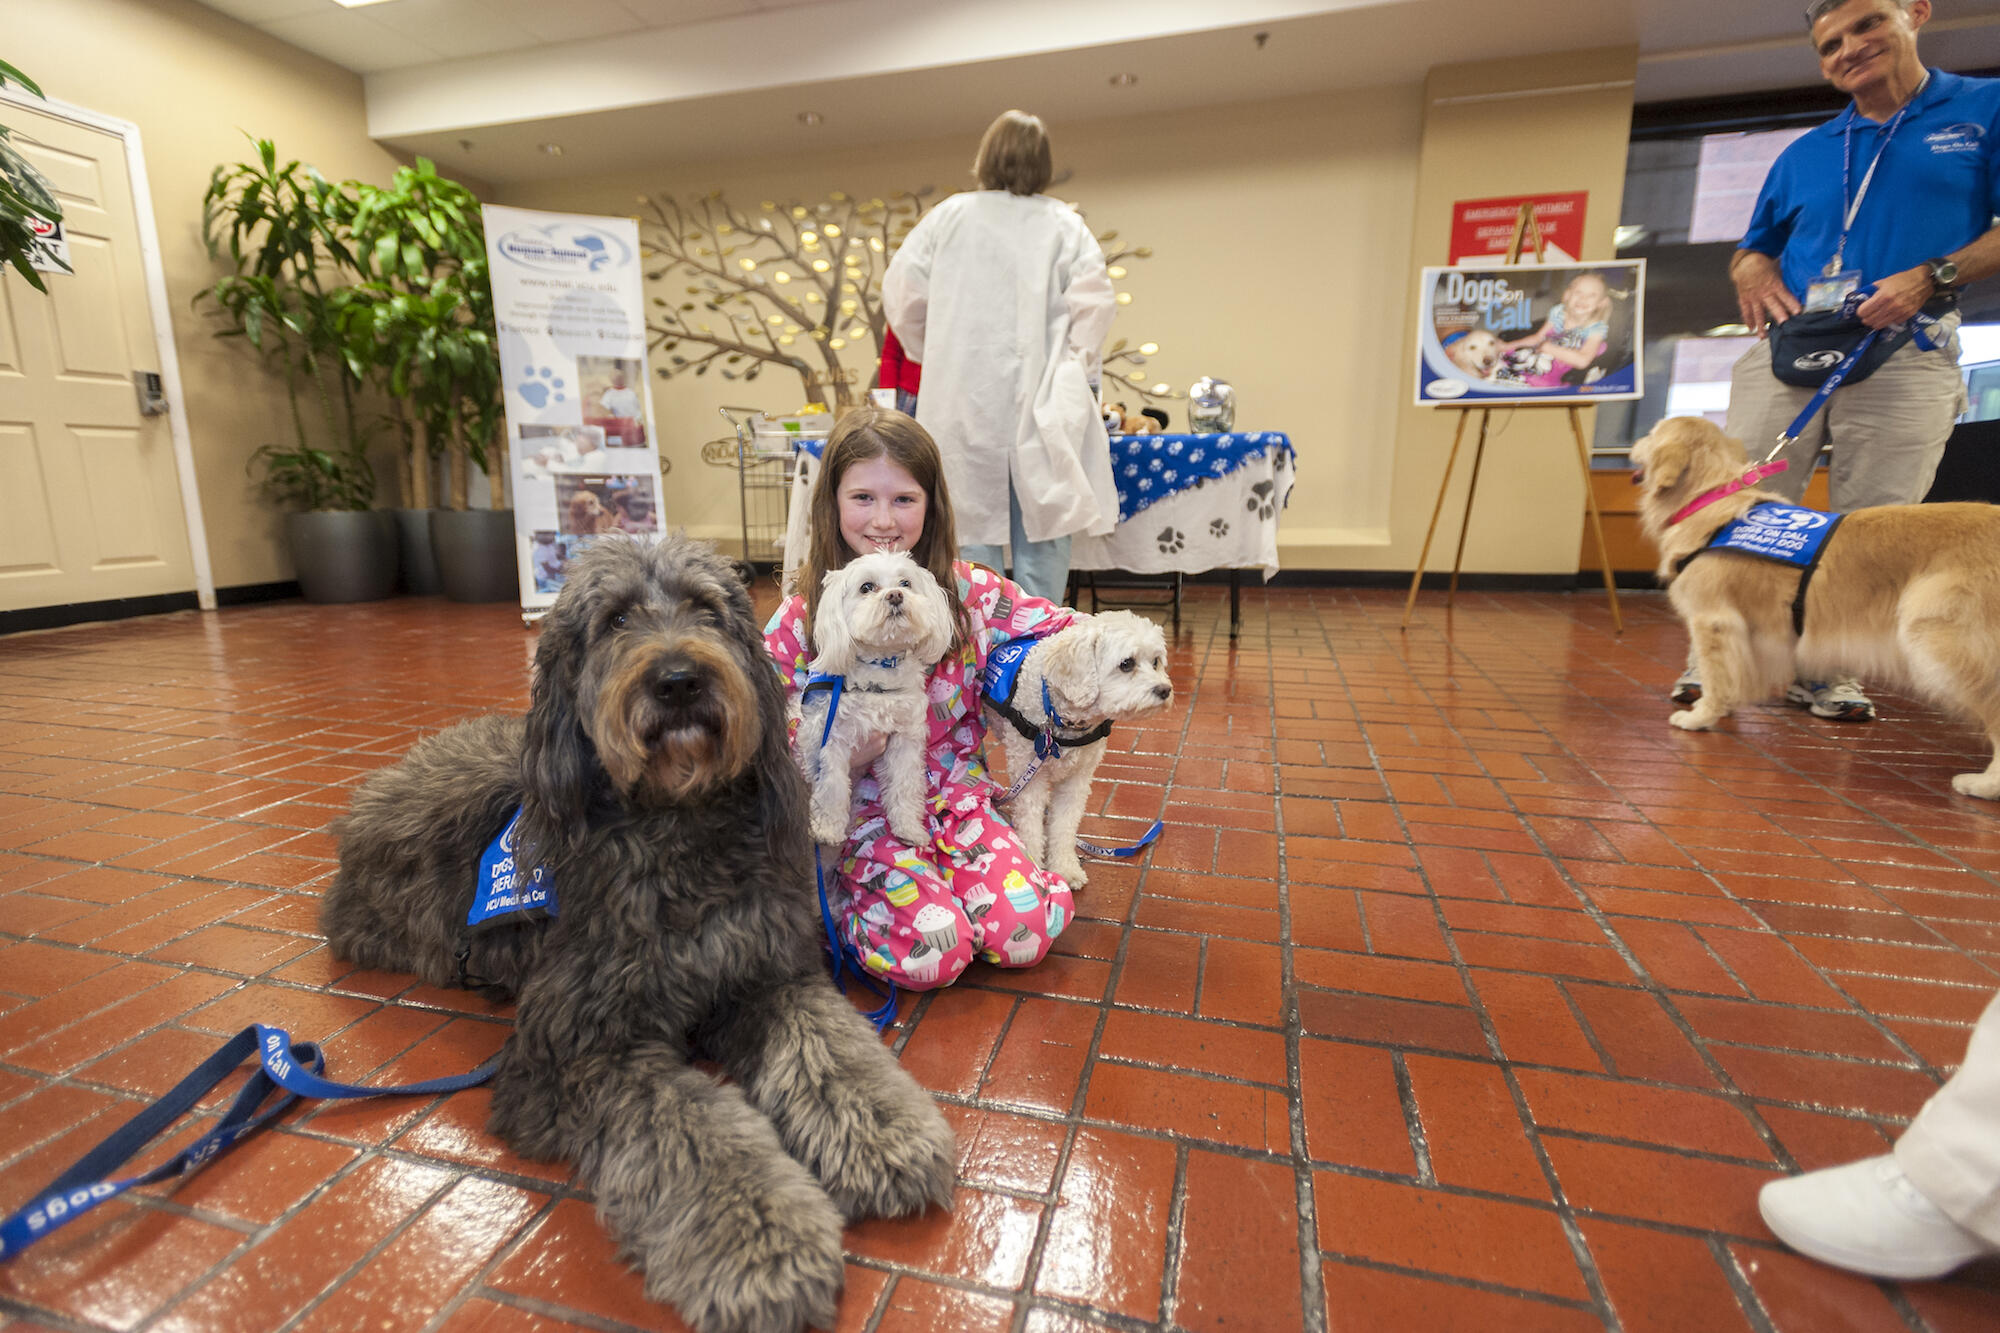 Therapy dogs from the Dogs on Call program brighten the days of patients at VCU Health. (Photo by Lindy Rodman, University Relations)